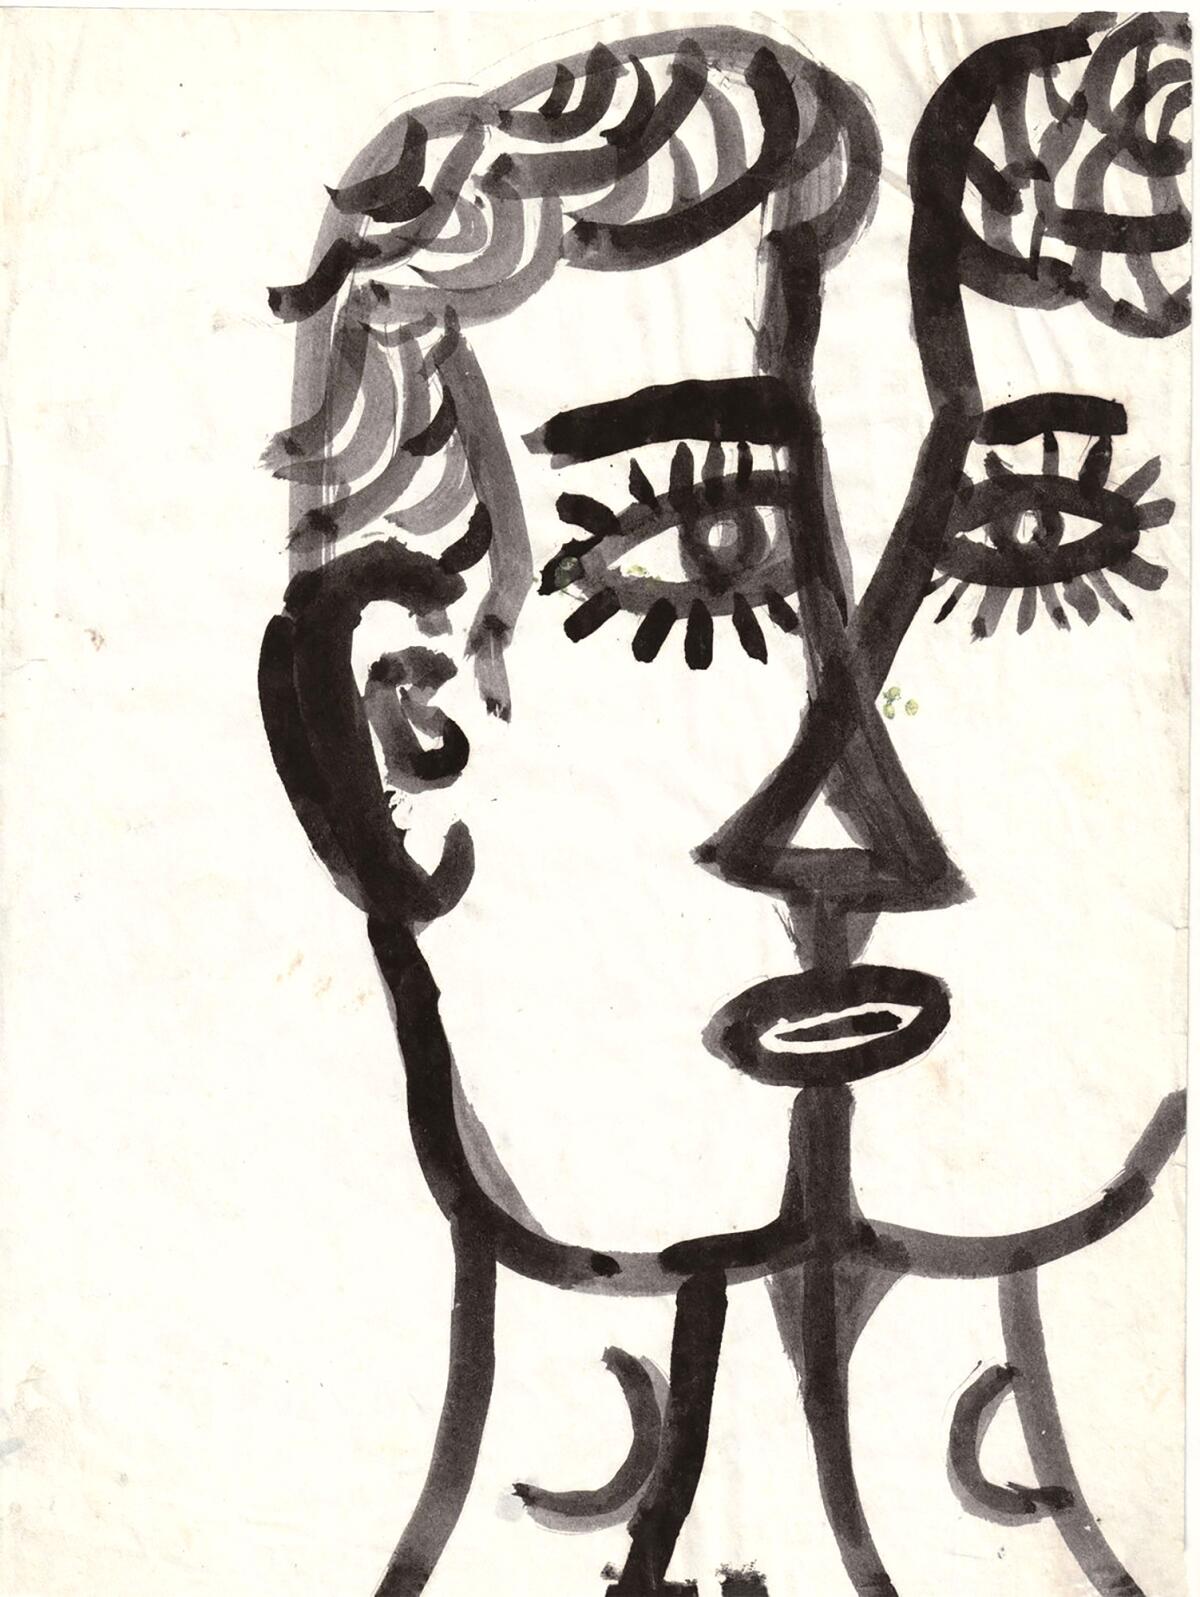 David Medalla, Untitled, ca. 1957 Graphite and China ink on paper. 11 × 8 7/16 in. (28 × 21.5 cm). 